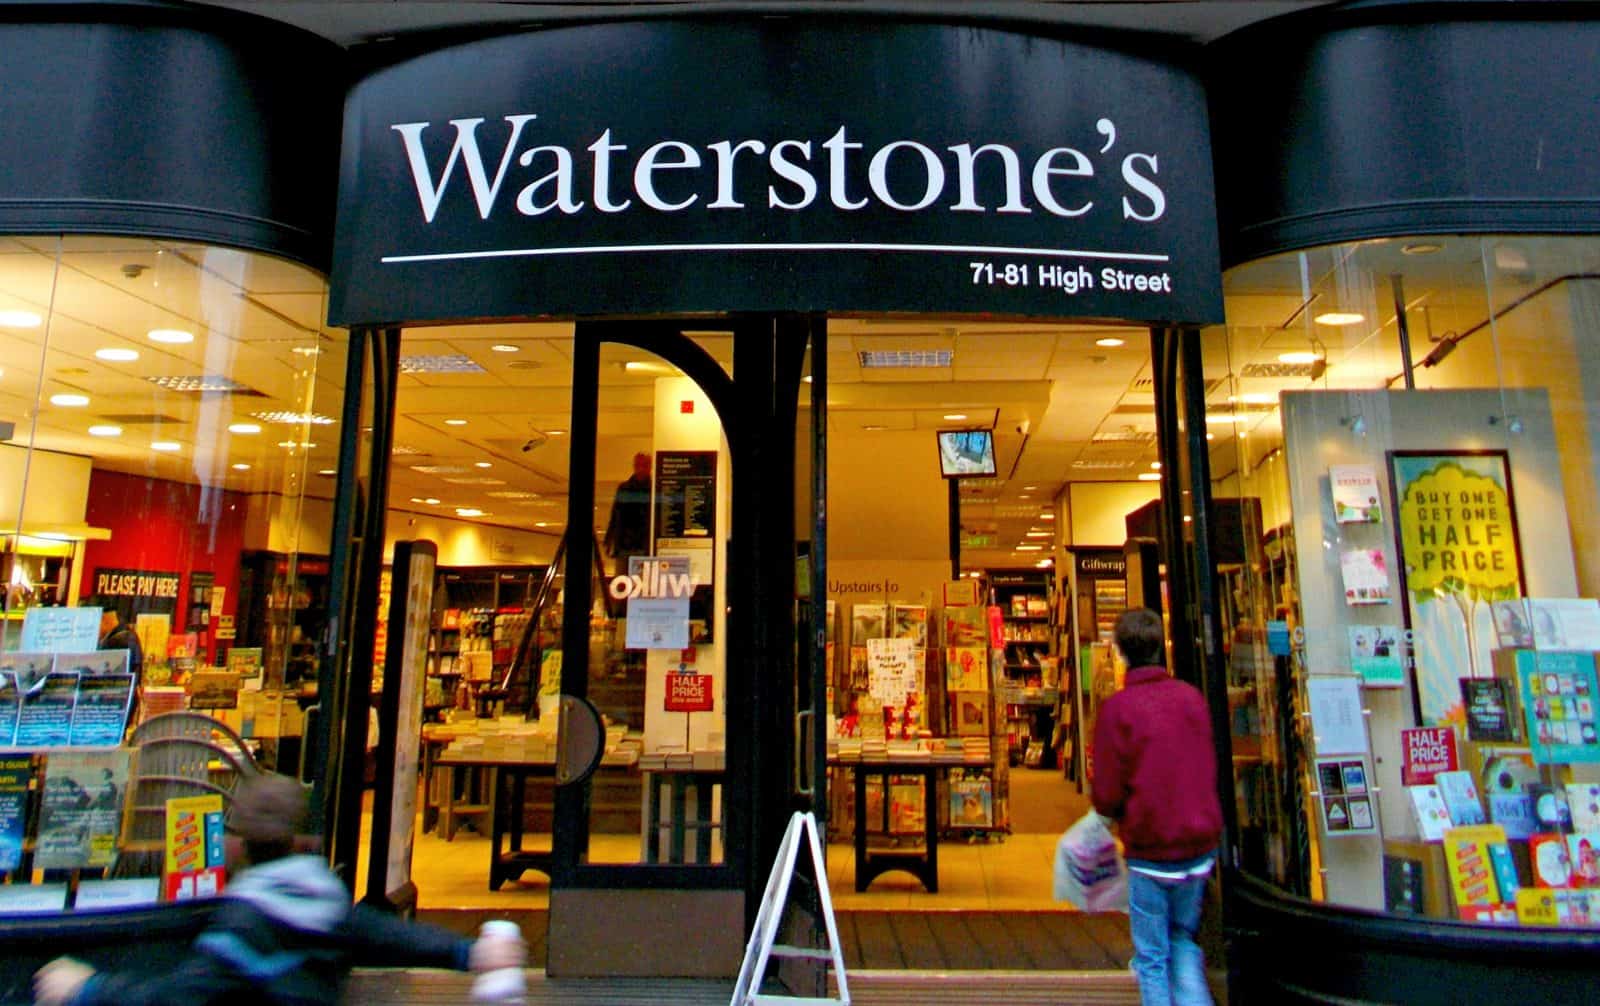 Management changes at Waterstones